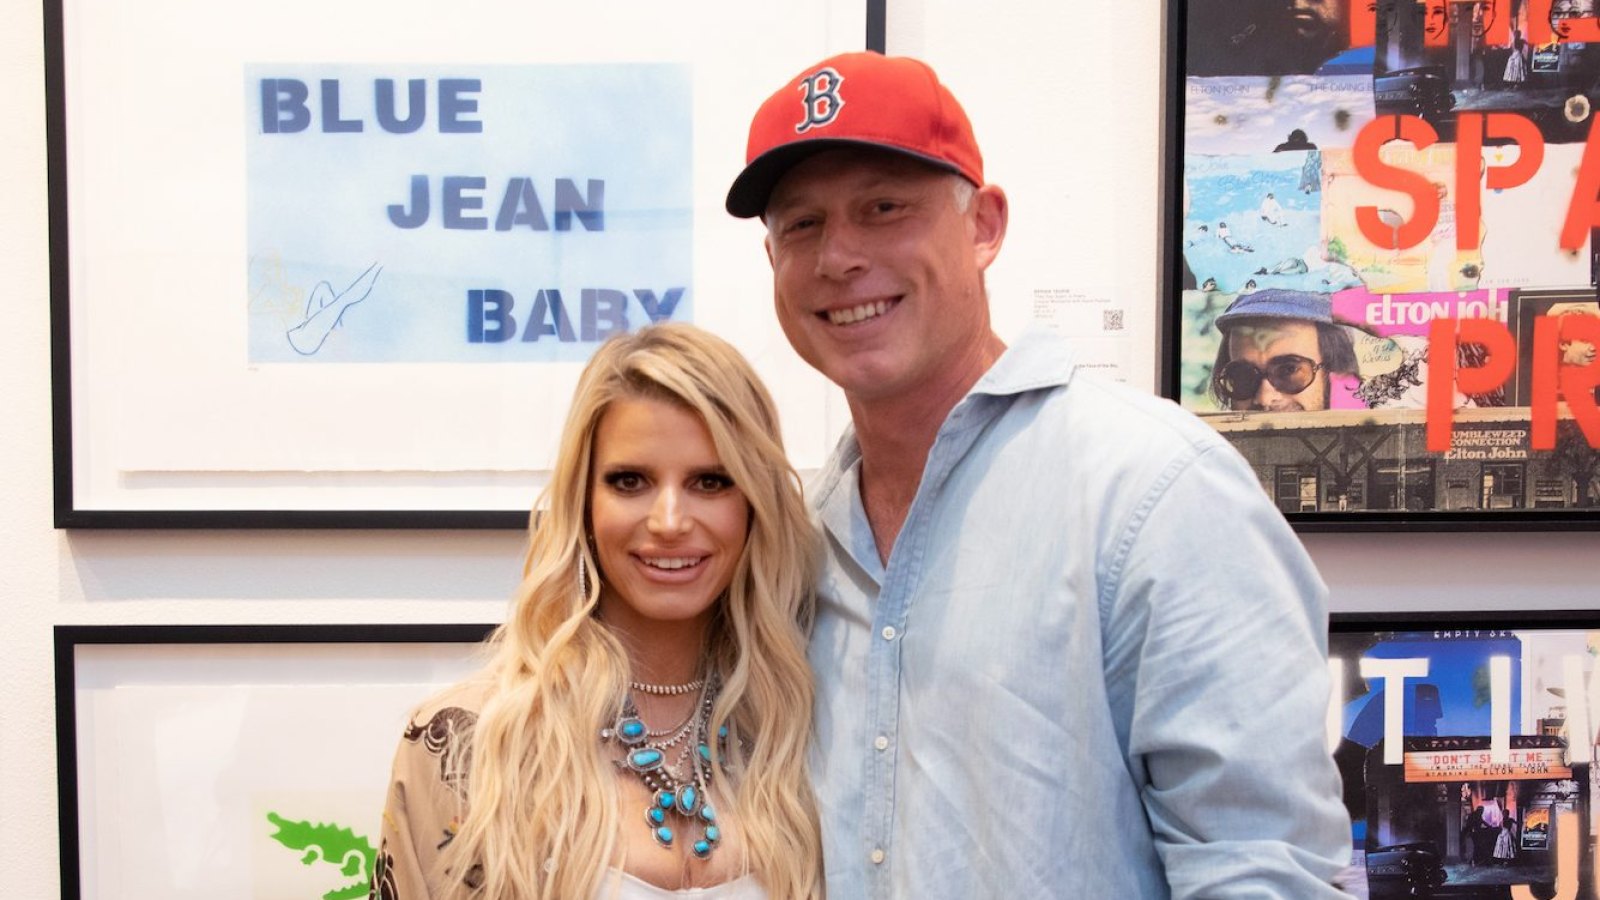 Jessica Simpson Is Taken With Husband Eric Johnson on His Birthday